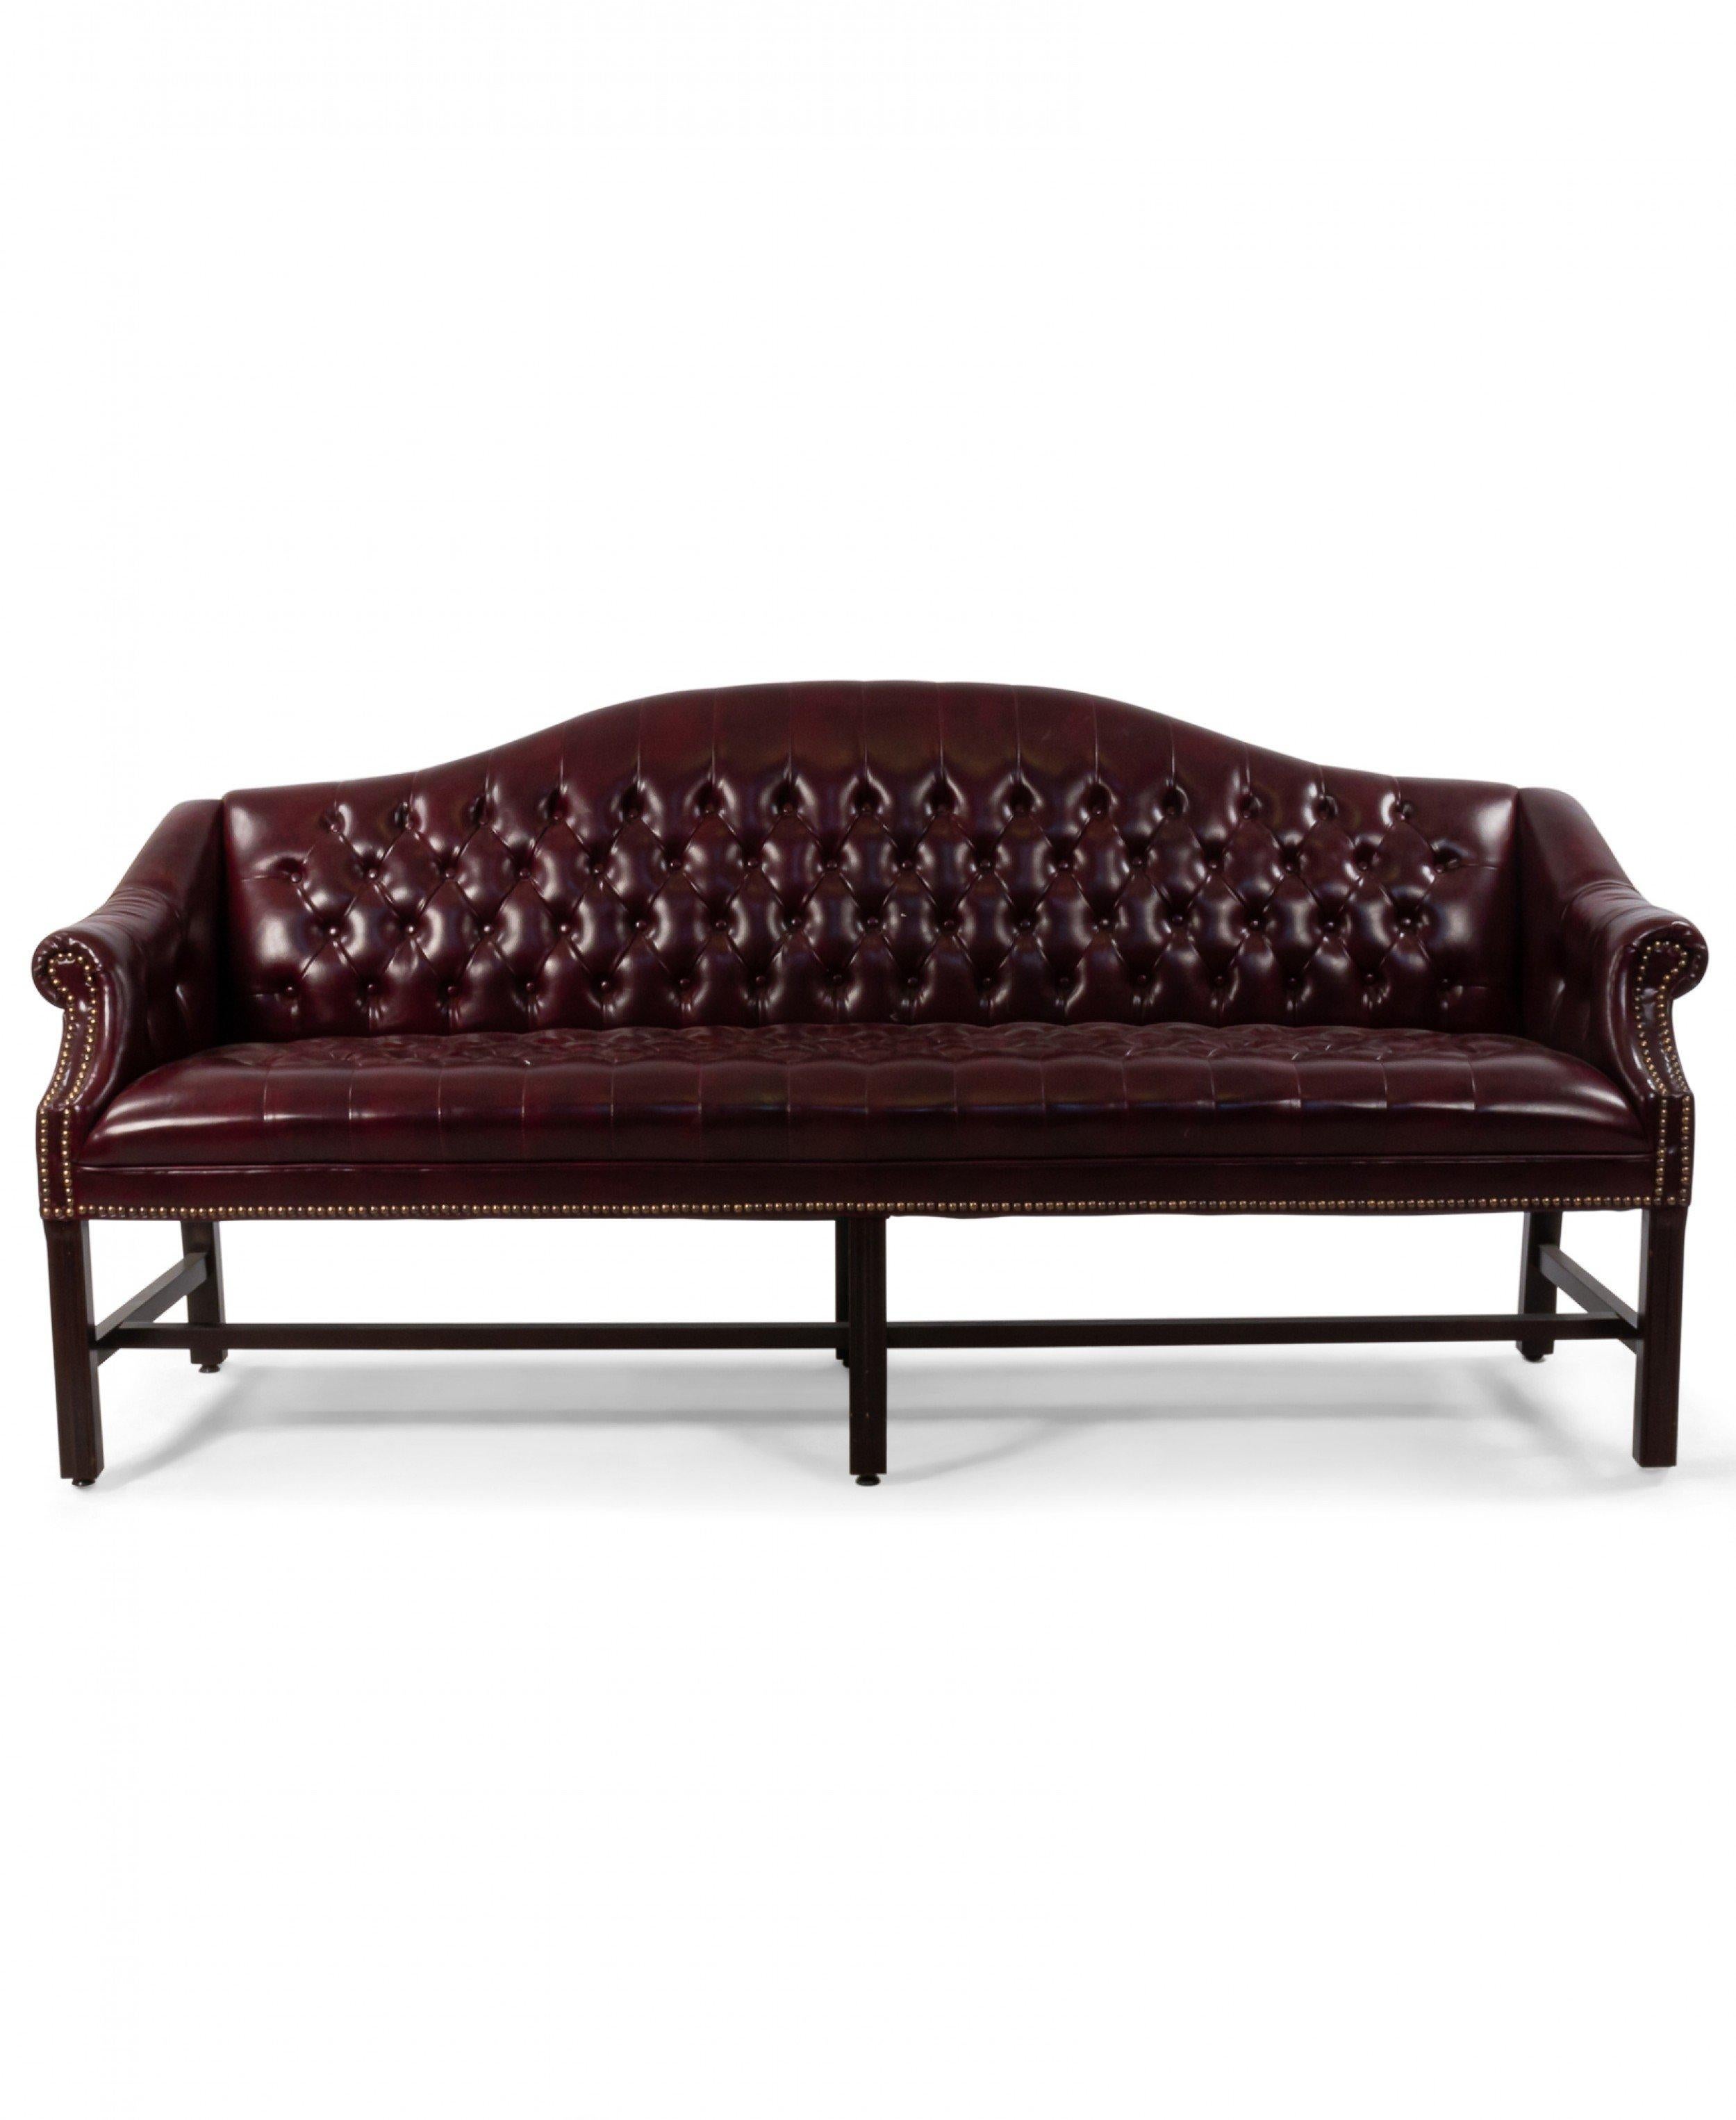 English Georgian style (20th century) burgundy leather camel-back button tufted chesterfield sofa with brass rivet trim supported on straight reeded legs and cross bar stretcher.